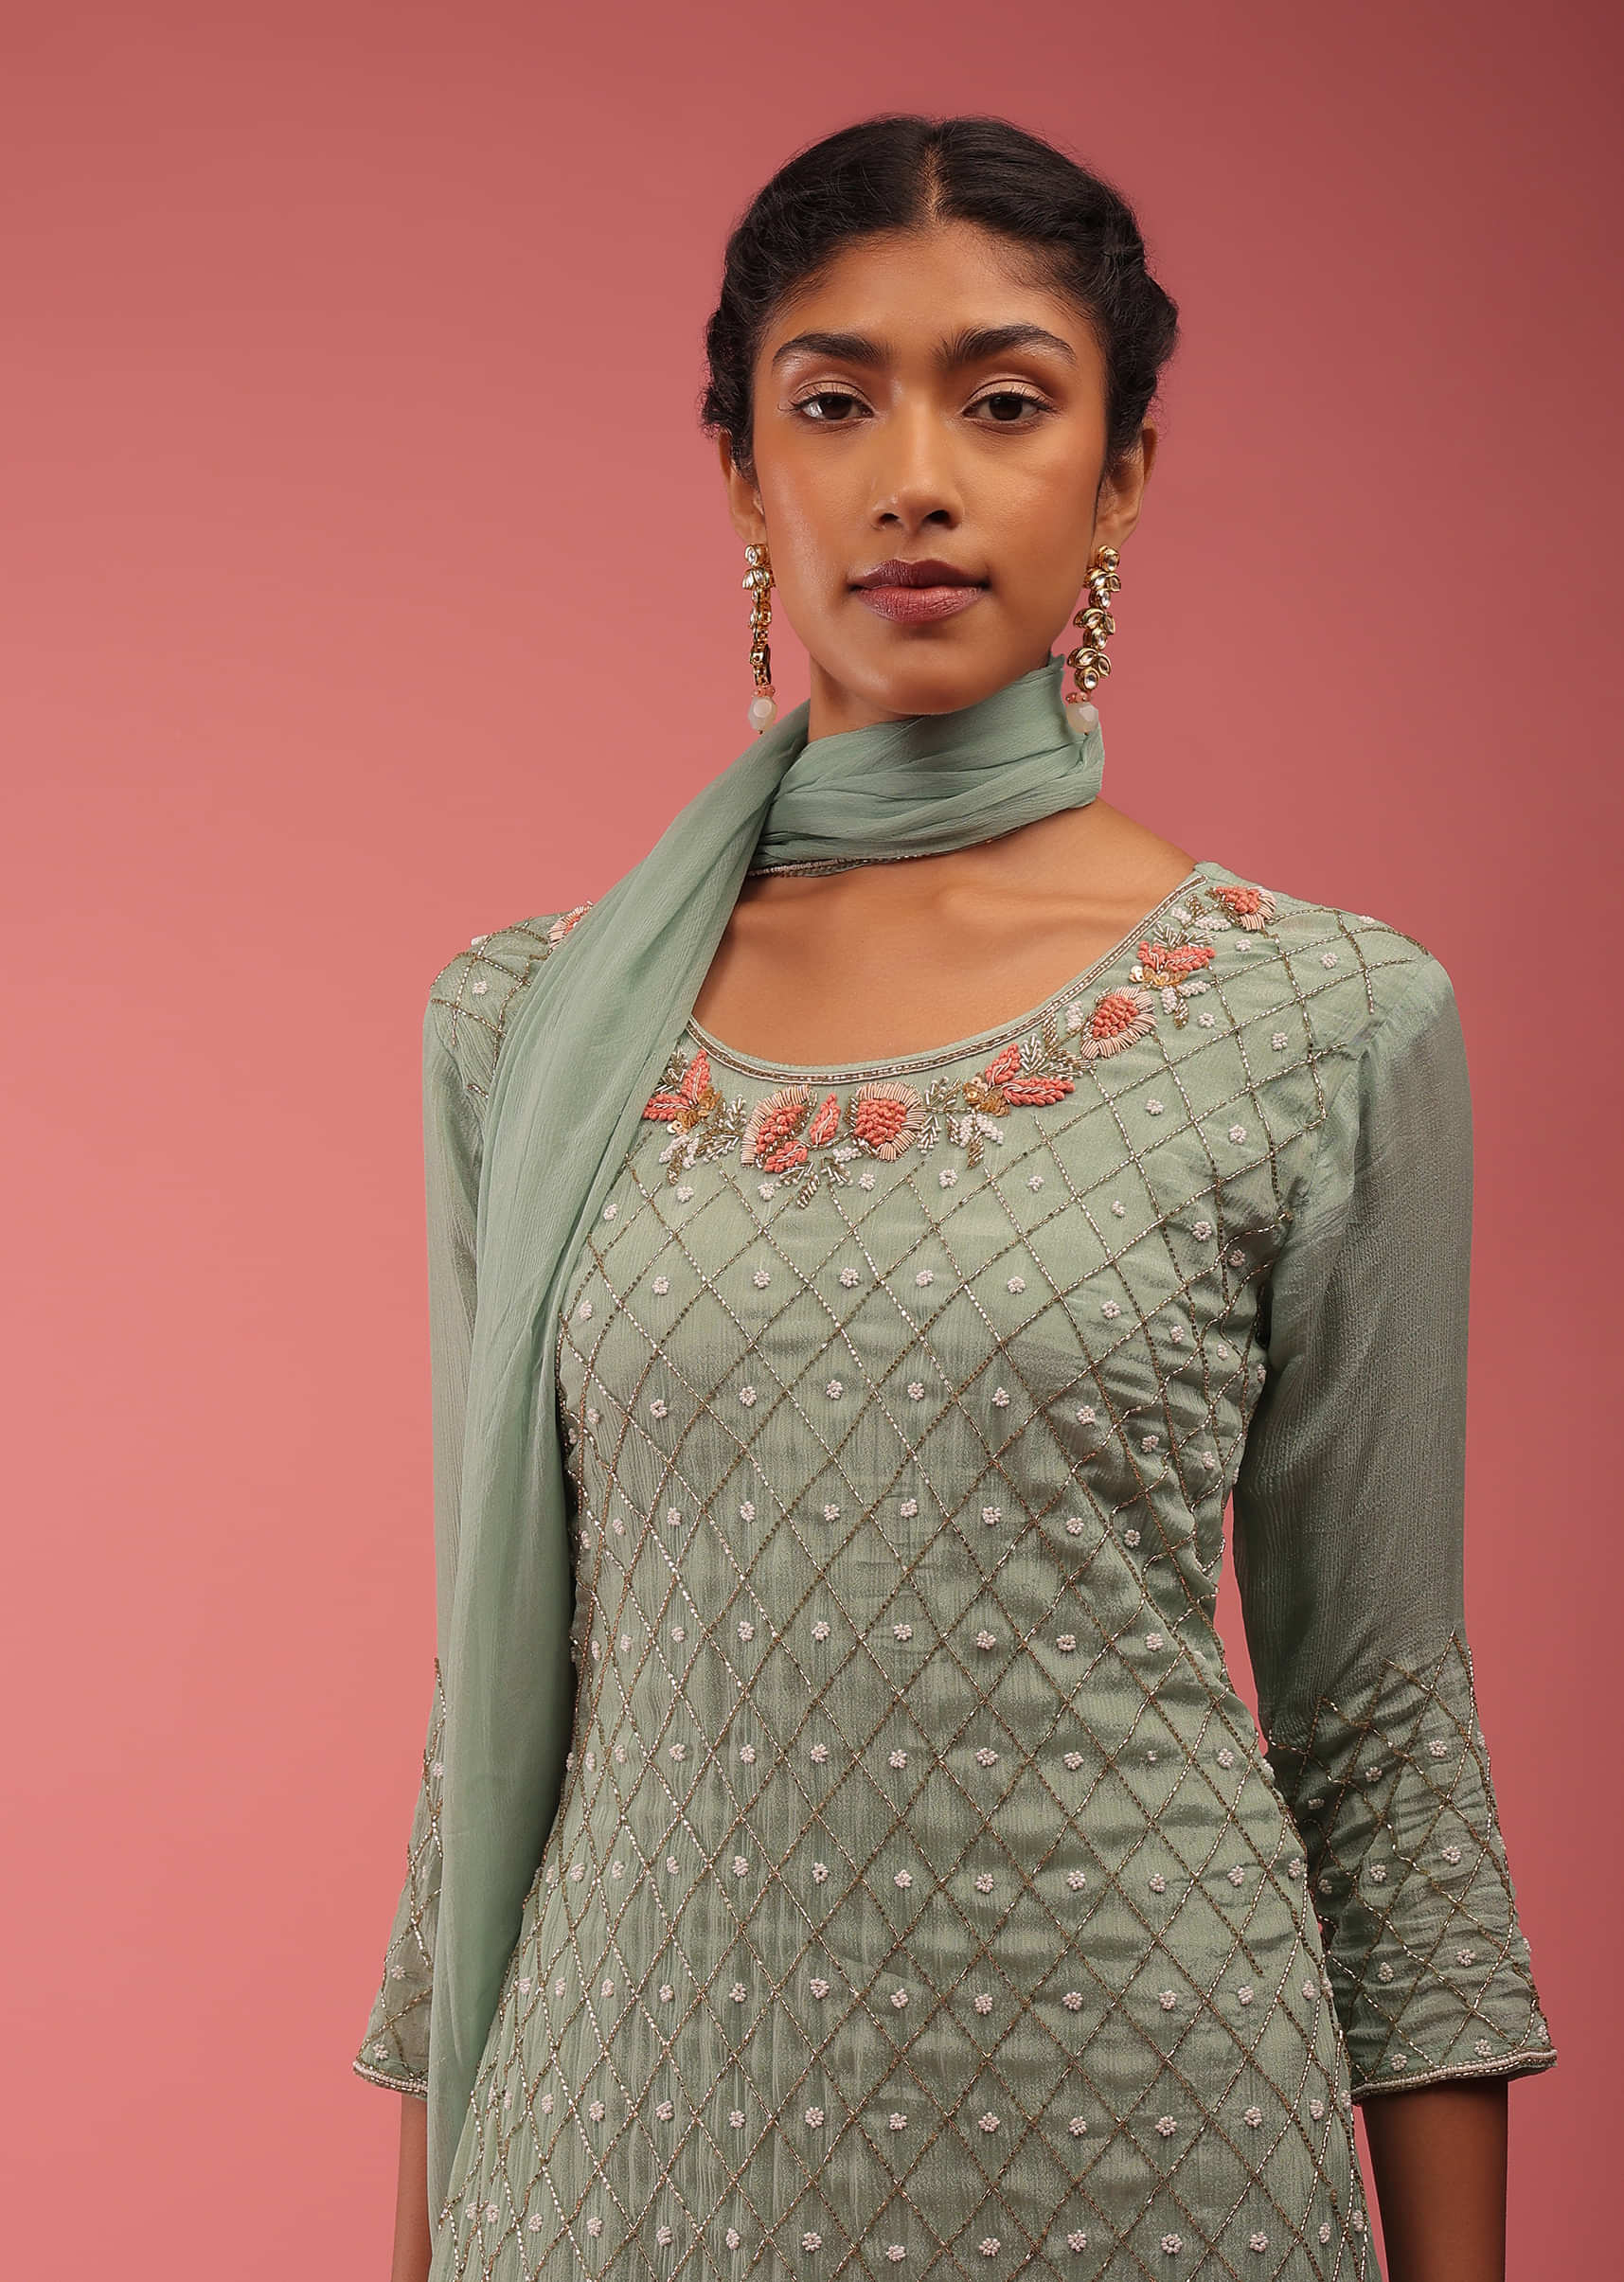 Quiet Green Sharara Suit In Cut Dana And Moti Embroidery, Crafted In Satin With Pink French Knots Embroidery On The Border